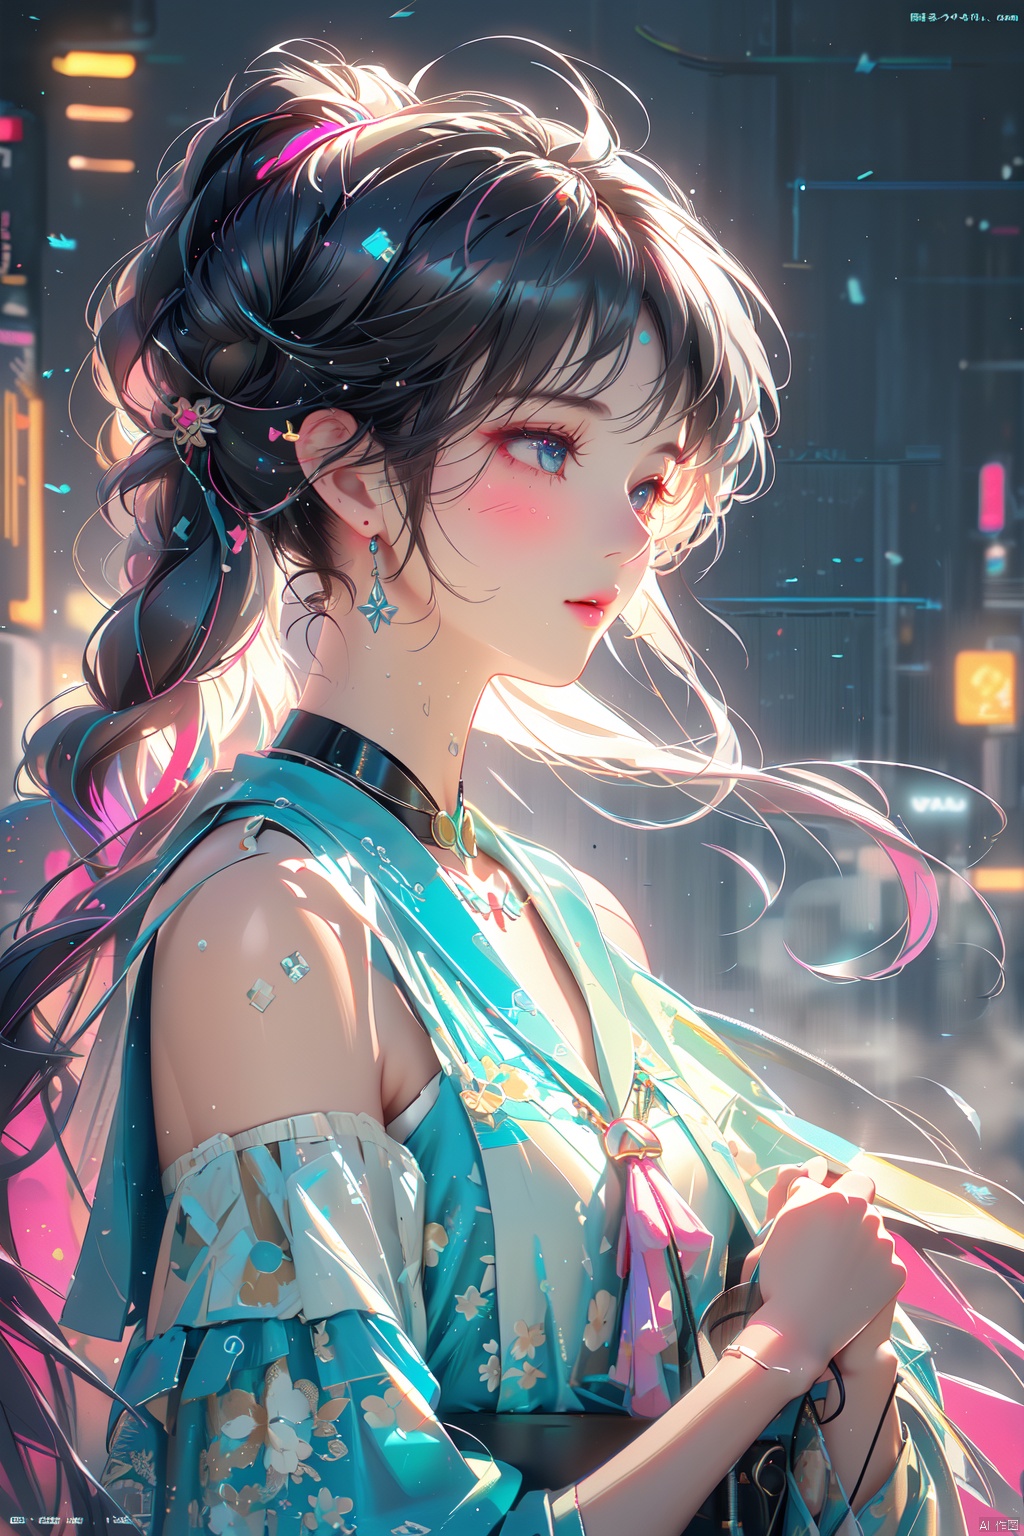 Texture matte, Chou Ying, neon light, girl's side, half face, slightly lowered head, upper body, exhaling mist in mouth, sailor moon hairstyle, ceramic patchwork skin, gently touching skin with hands, fluorescent color, master level composition, spacious and distant, cyberpunk, neon light,